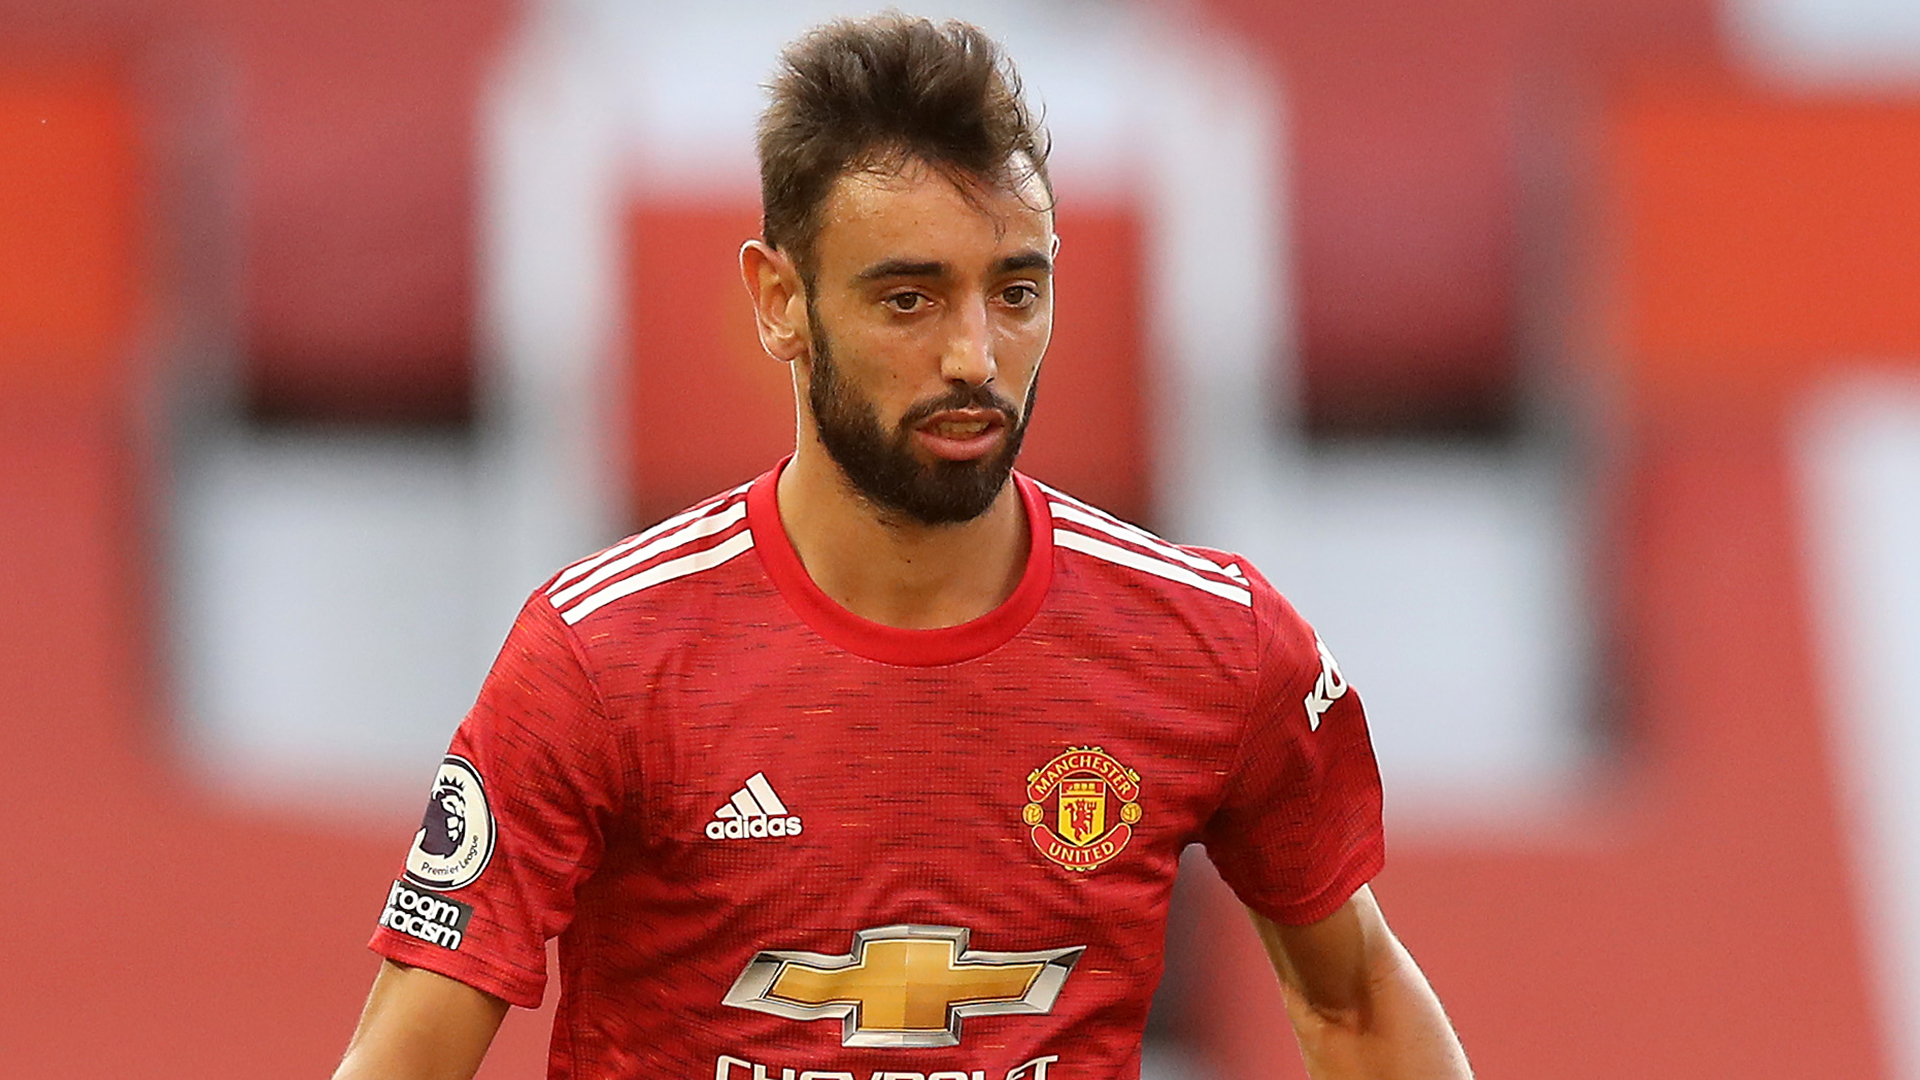 Man Utd star Bruno Fernandes reveals gratitude to healthcare worker brother amid Covid-19 pandemic